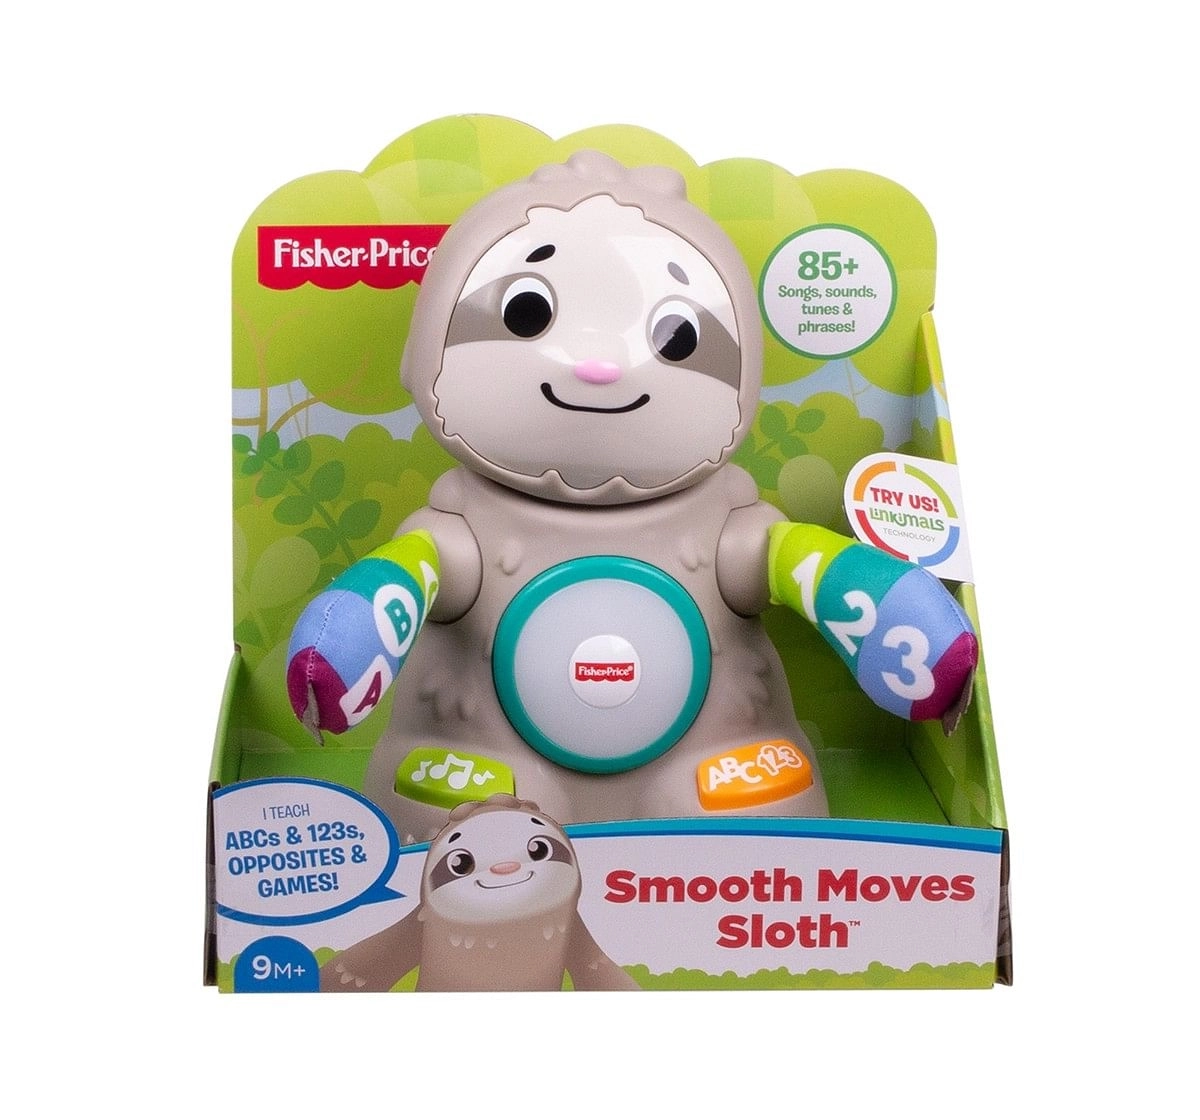 Fisher-Price Linkimals Smooth Moves Sloth Learning Toys for Kids age 9M+ 